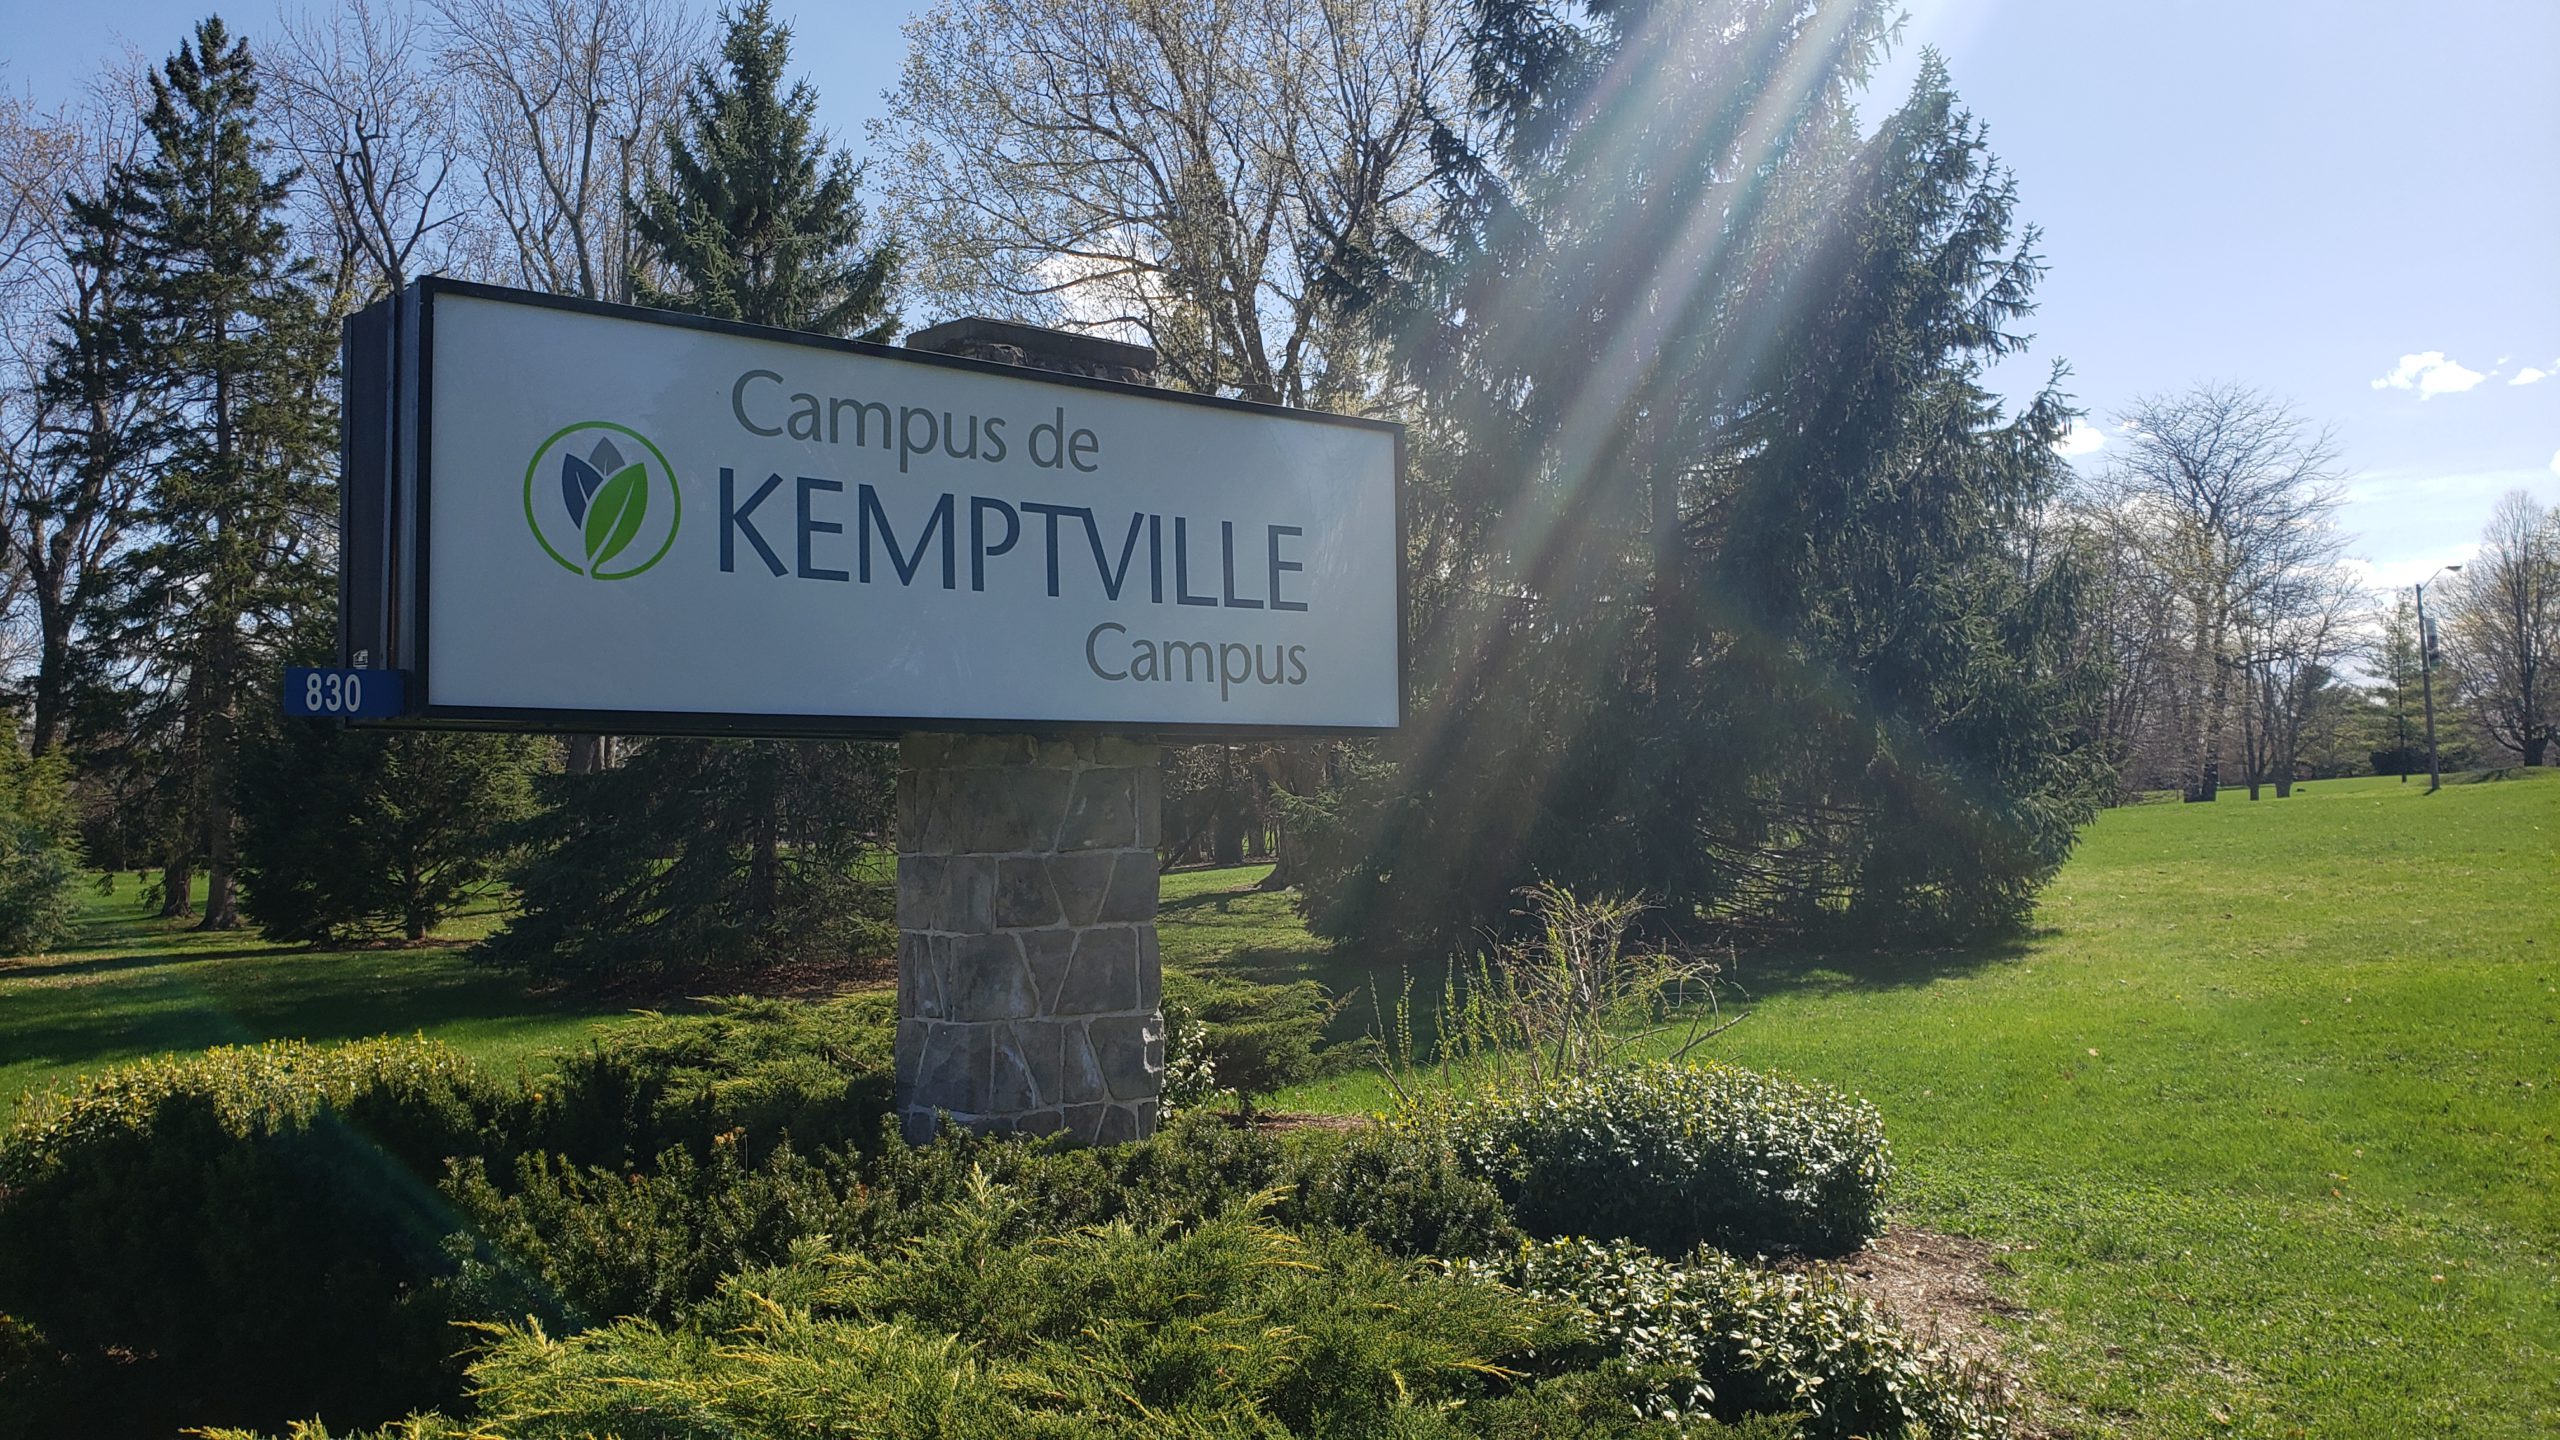 Update Ontario Liberal Party Calls On Premier Ford To Reconsider Kemptville Prison My